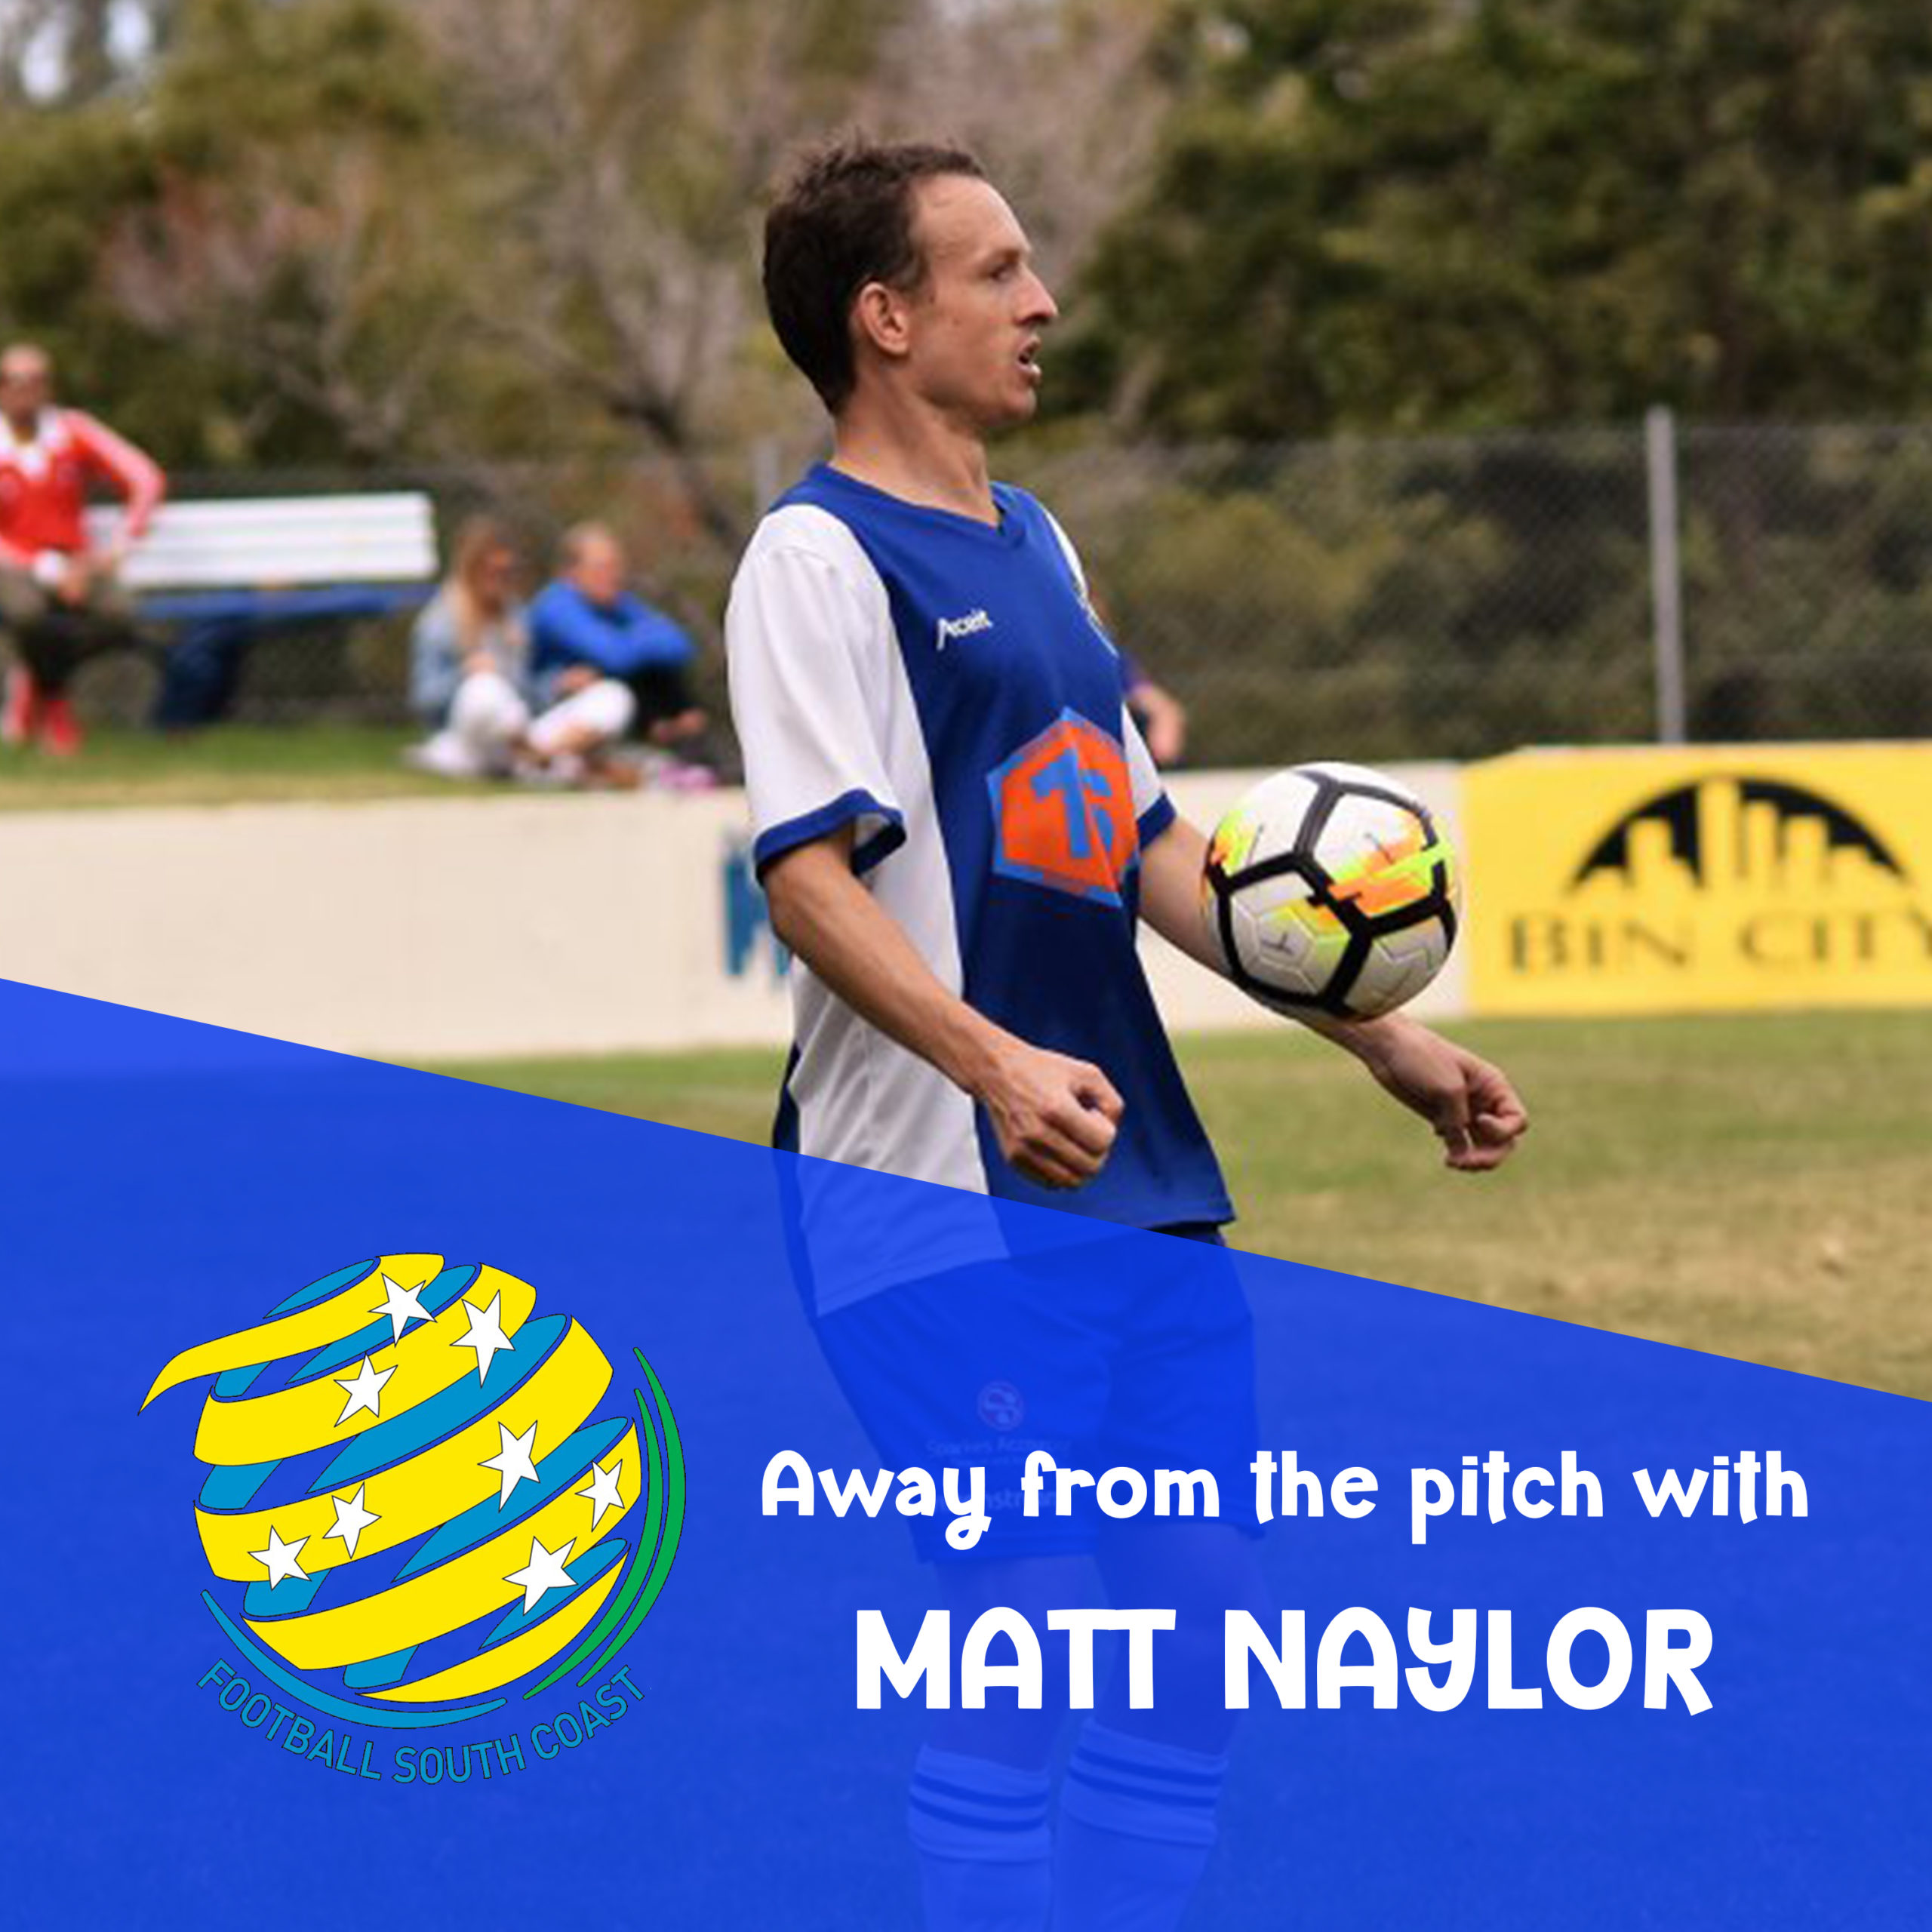 Away from the pitch with Matt Naylor artwork